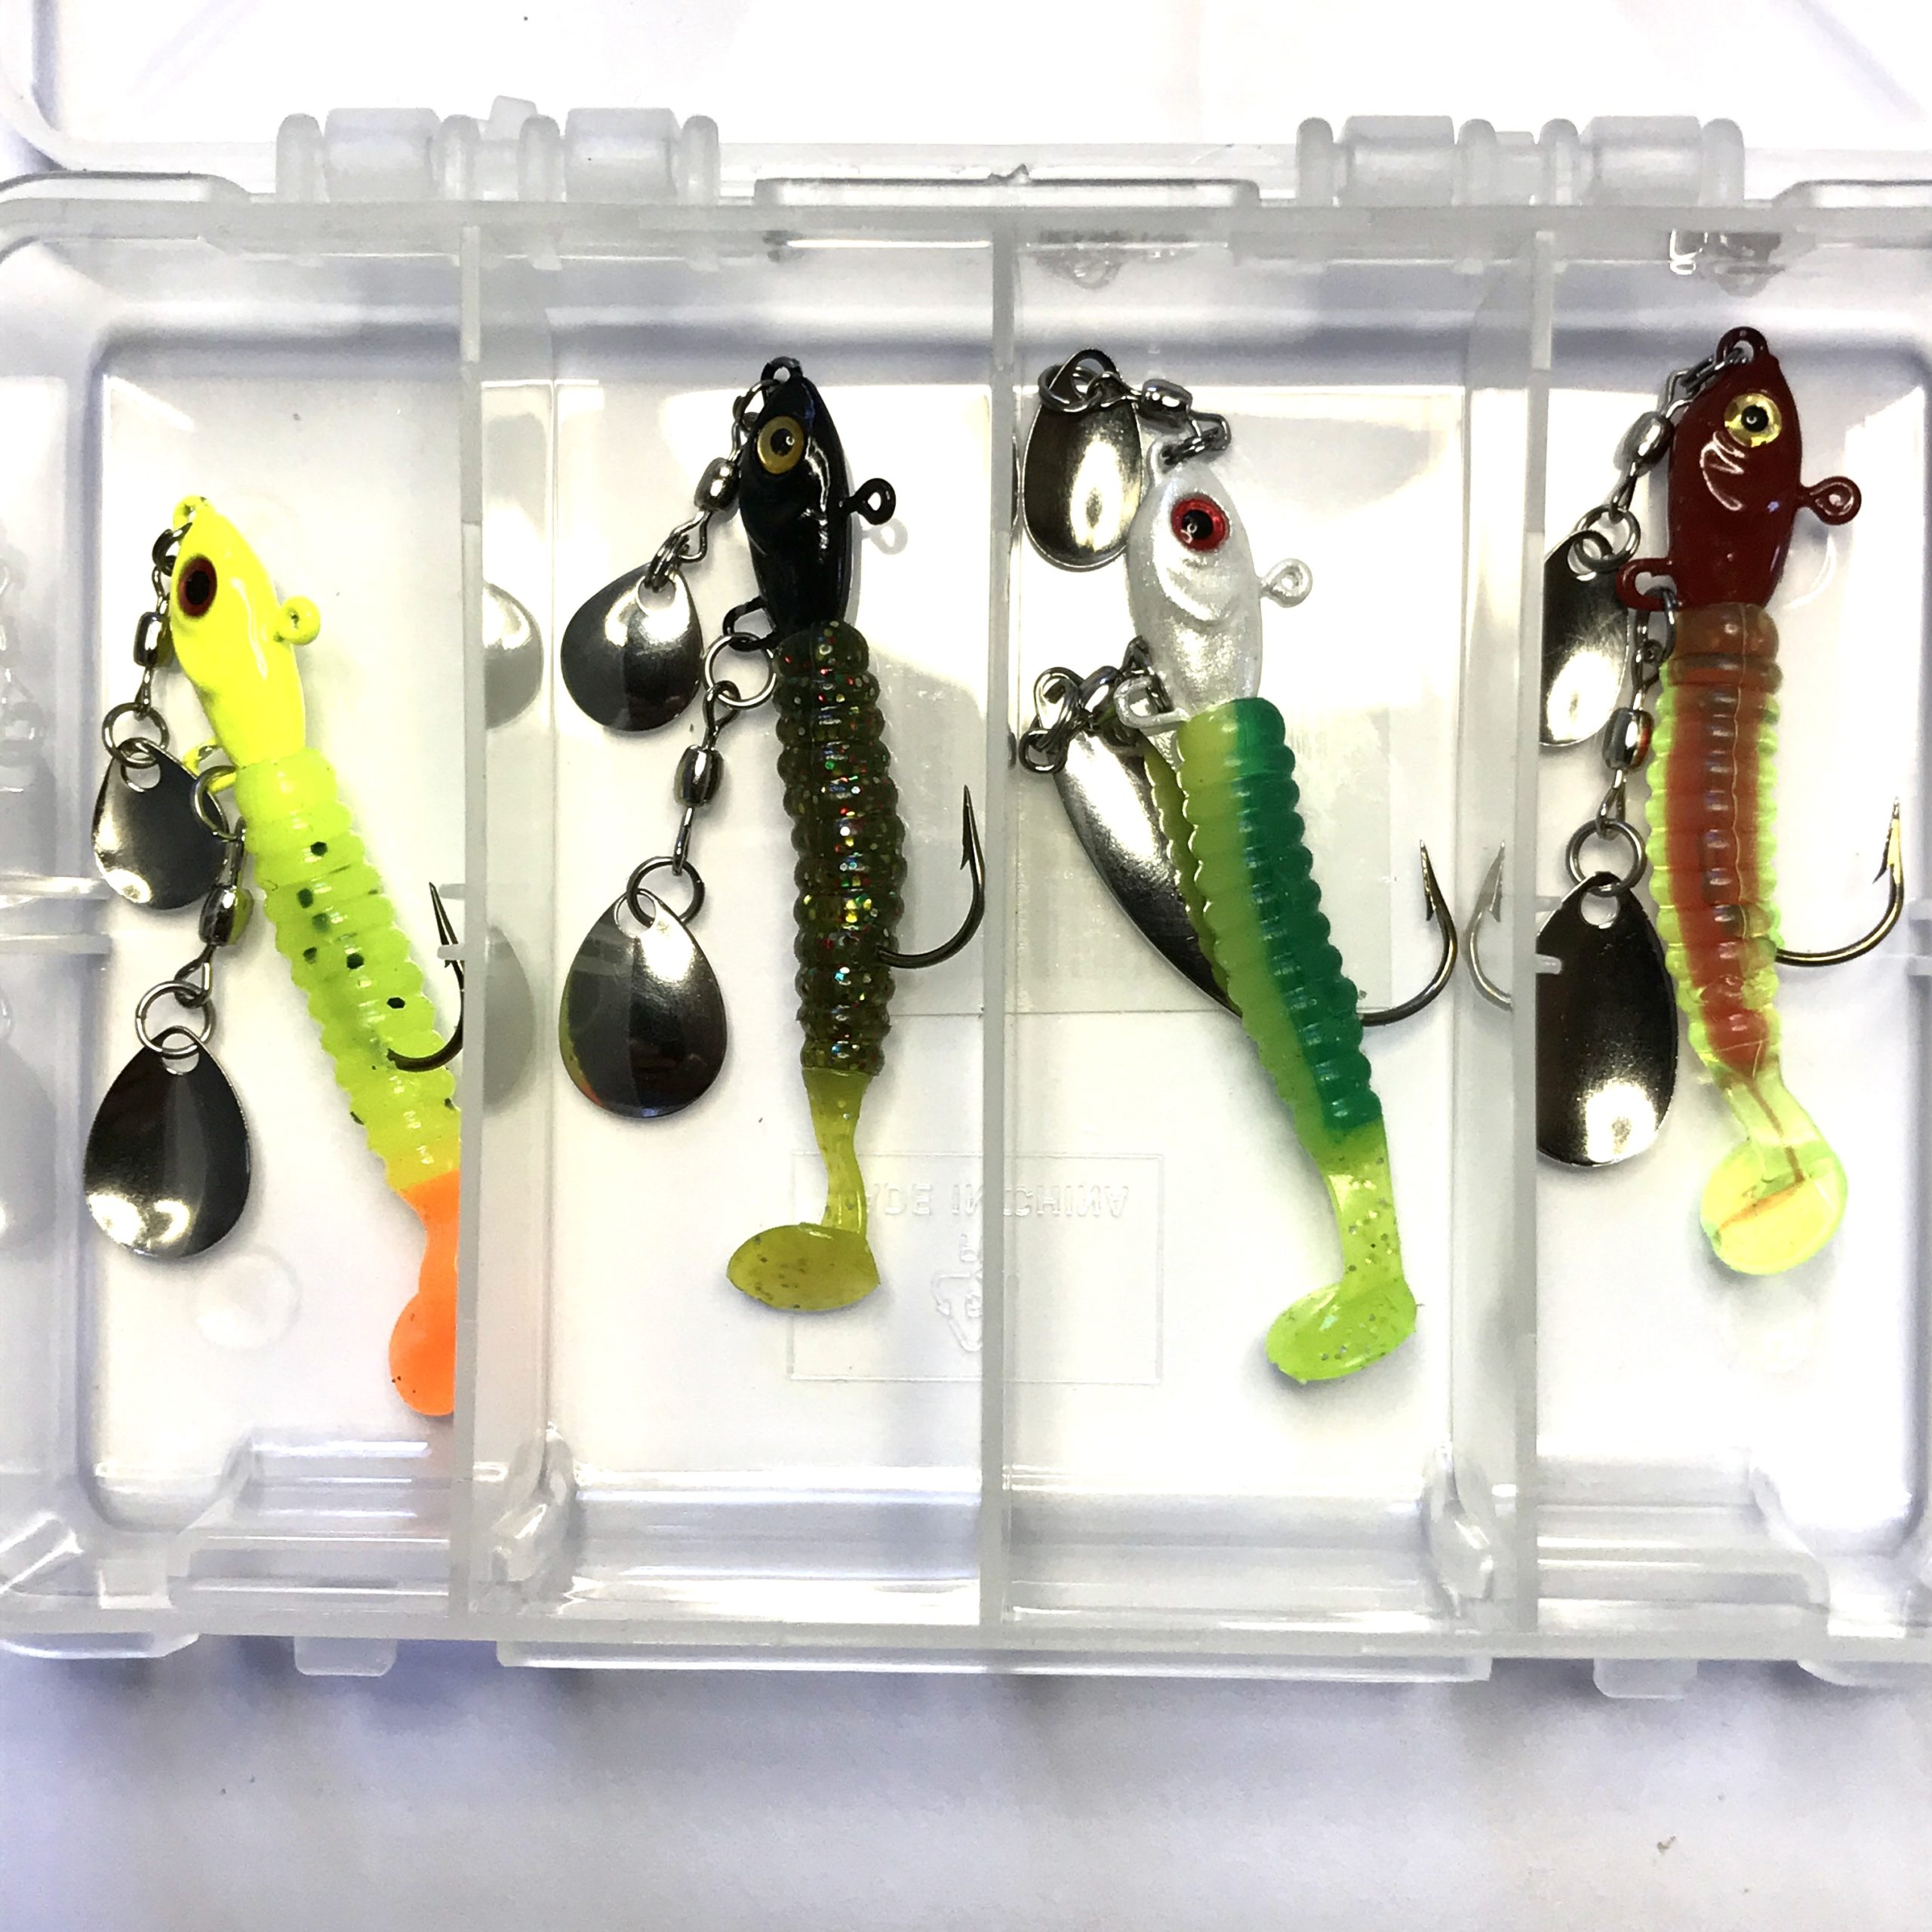 crappie fishing lures, crappie fishing lures Suppliers and Manufacturers at